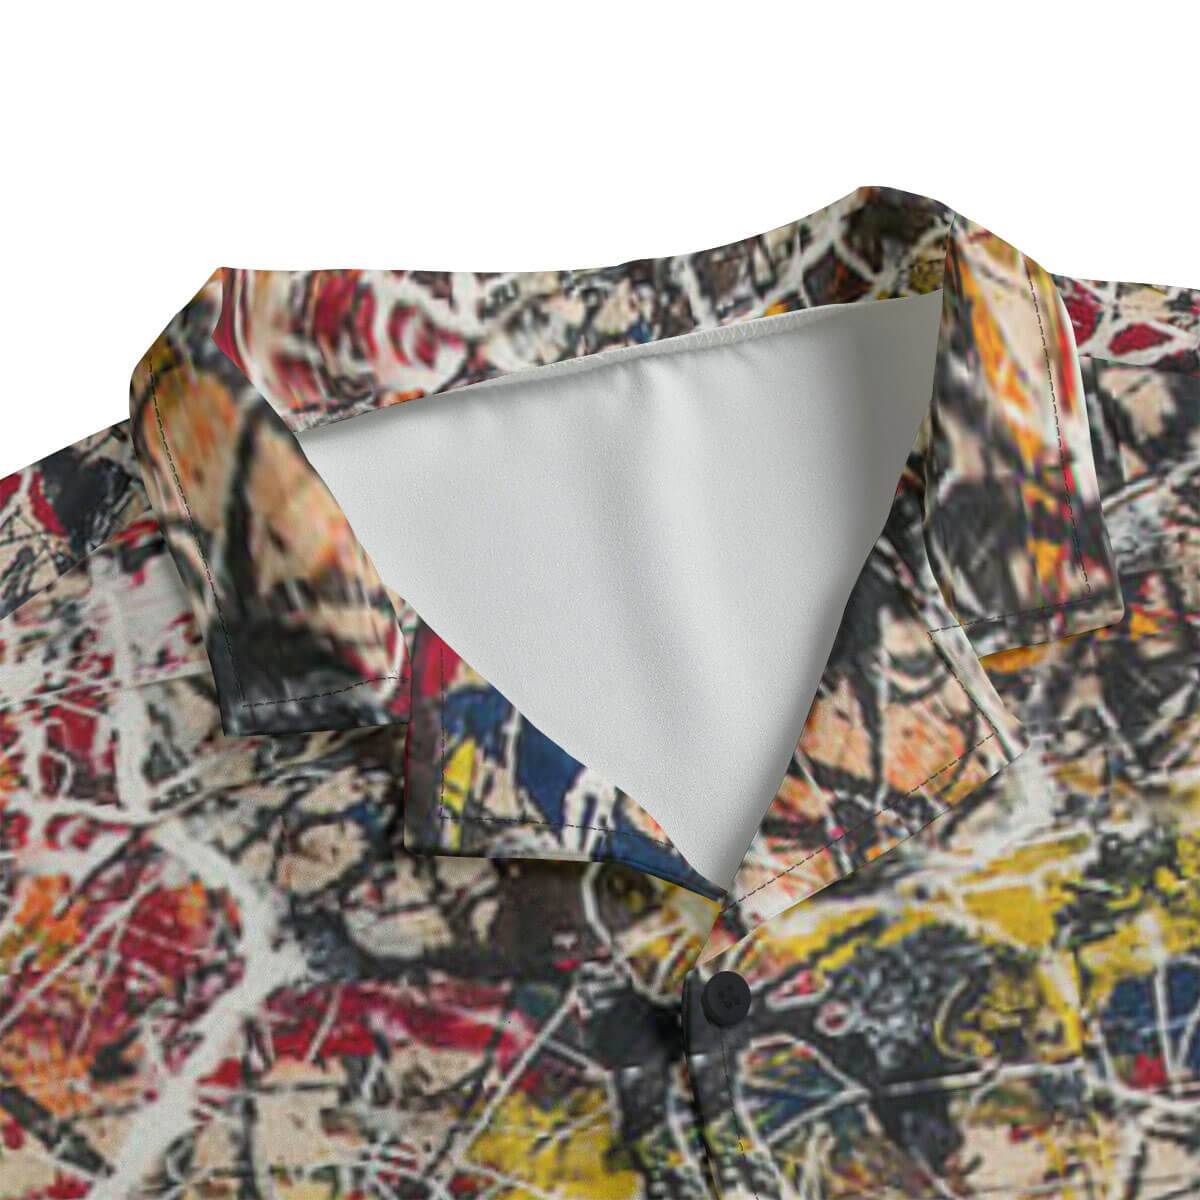 Lightweight and breathable artistic shirt